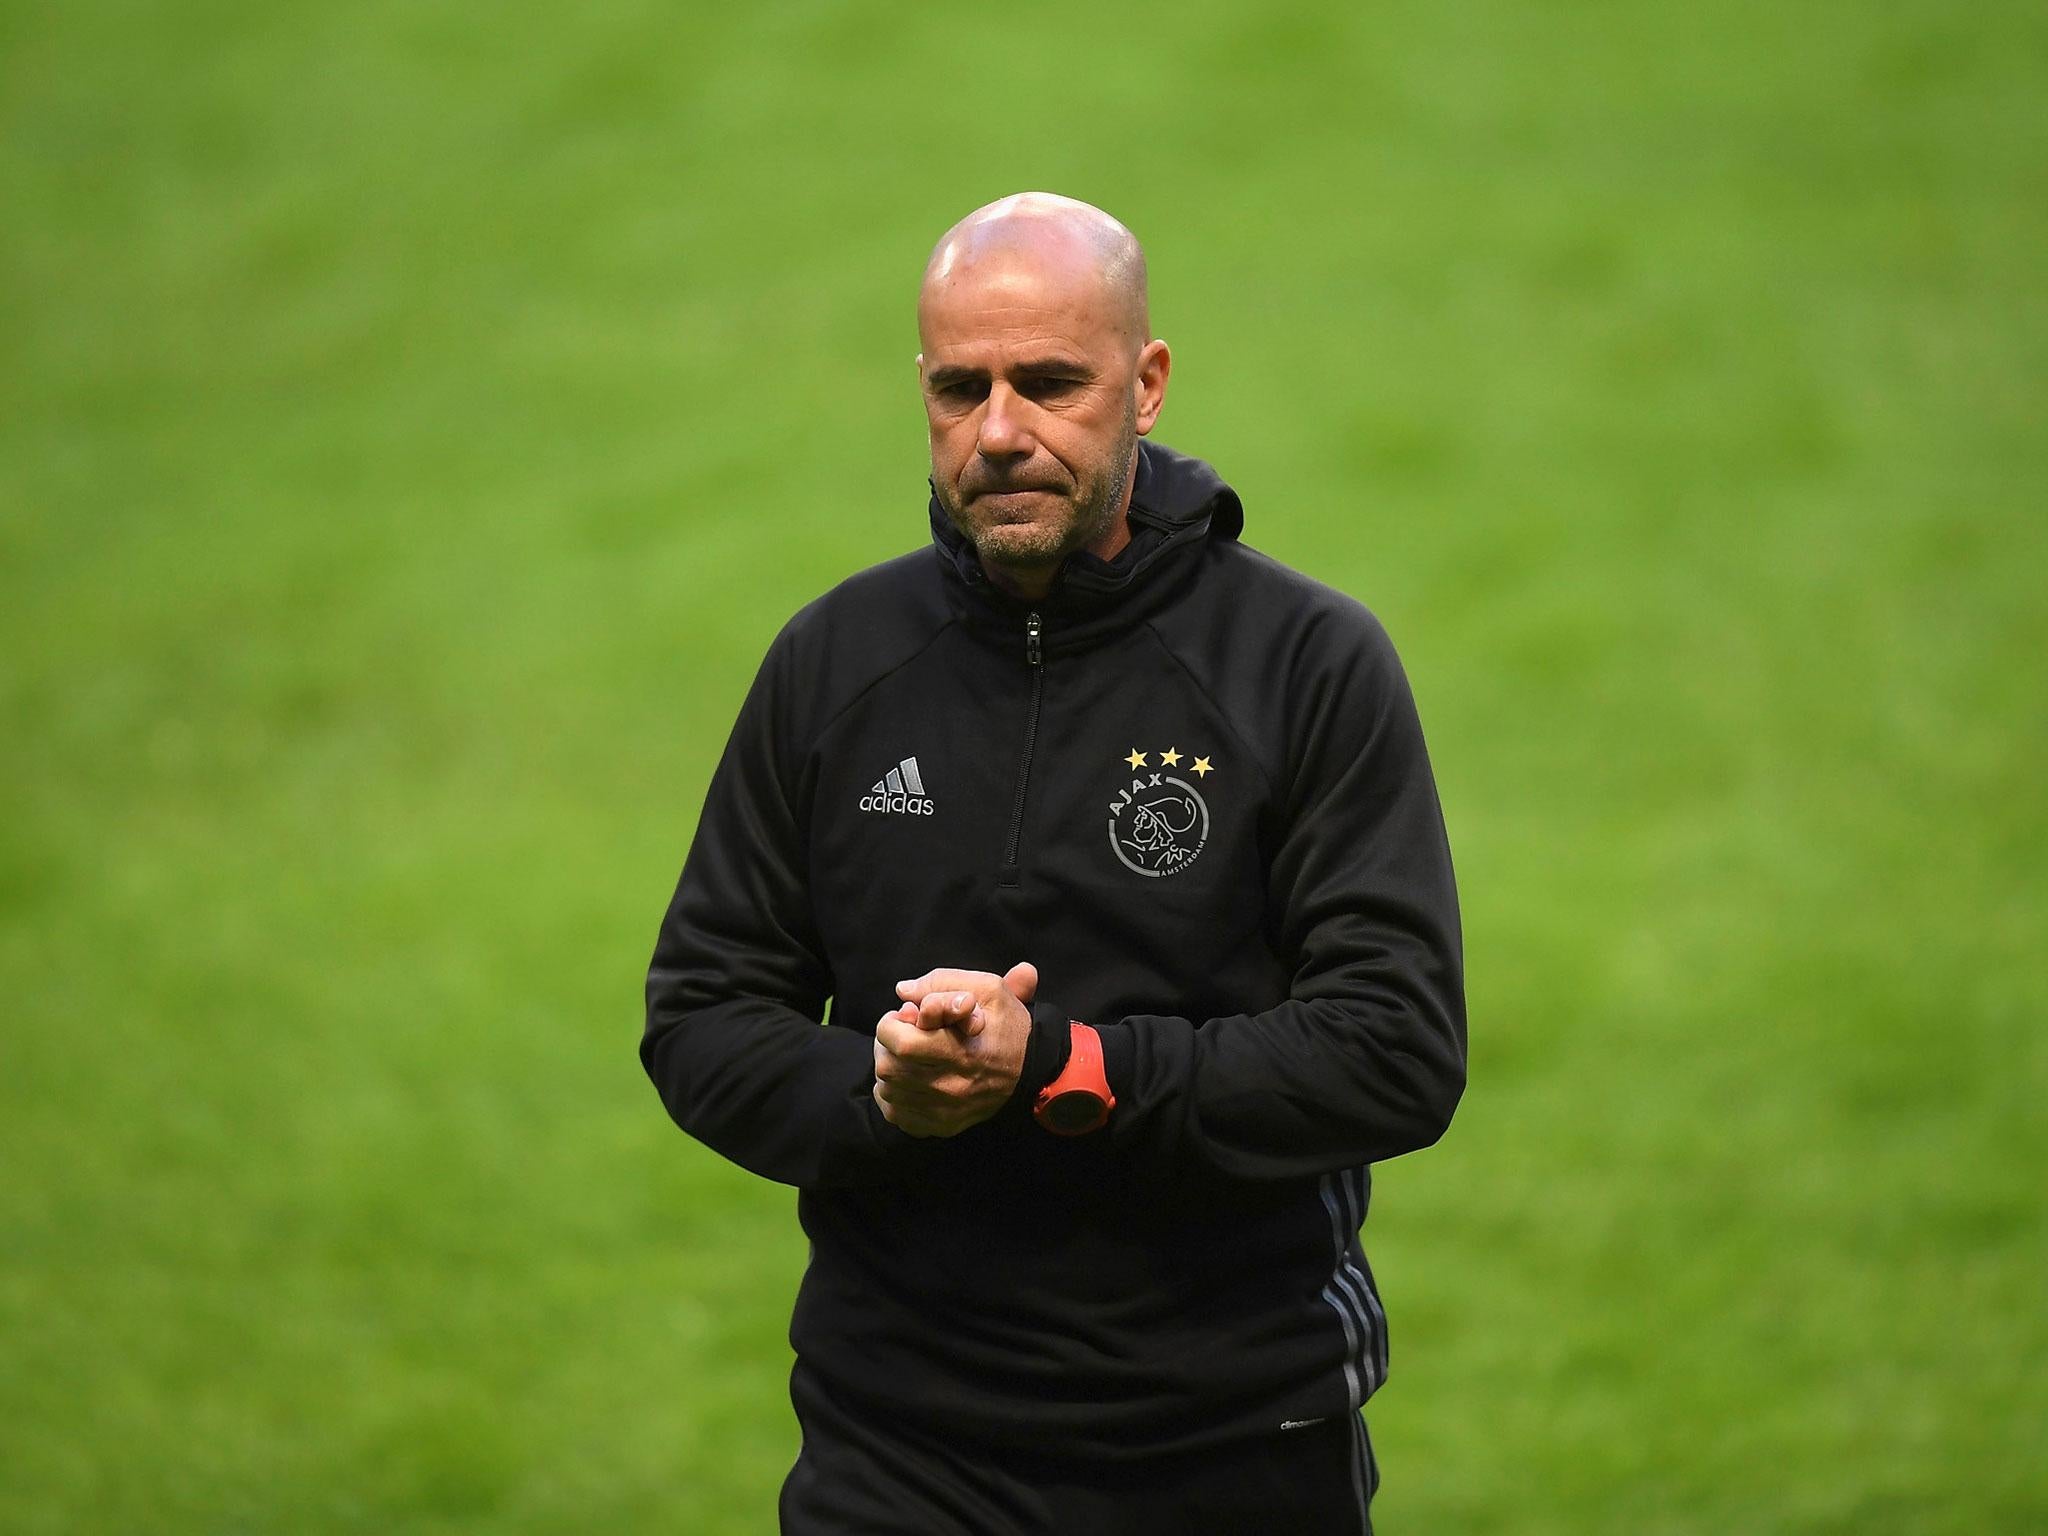 Peter Bosz offered his 'heartfelt sympathies' to the victims of the attack